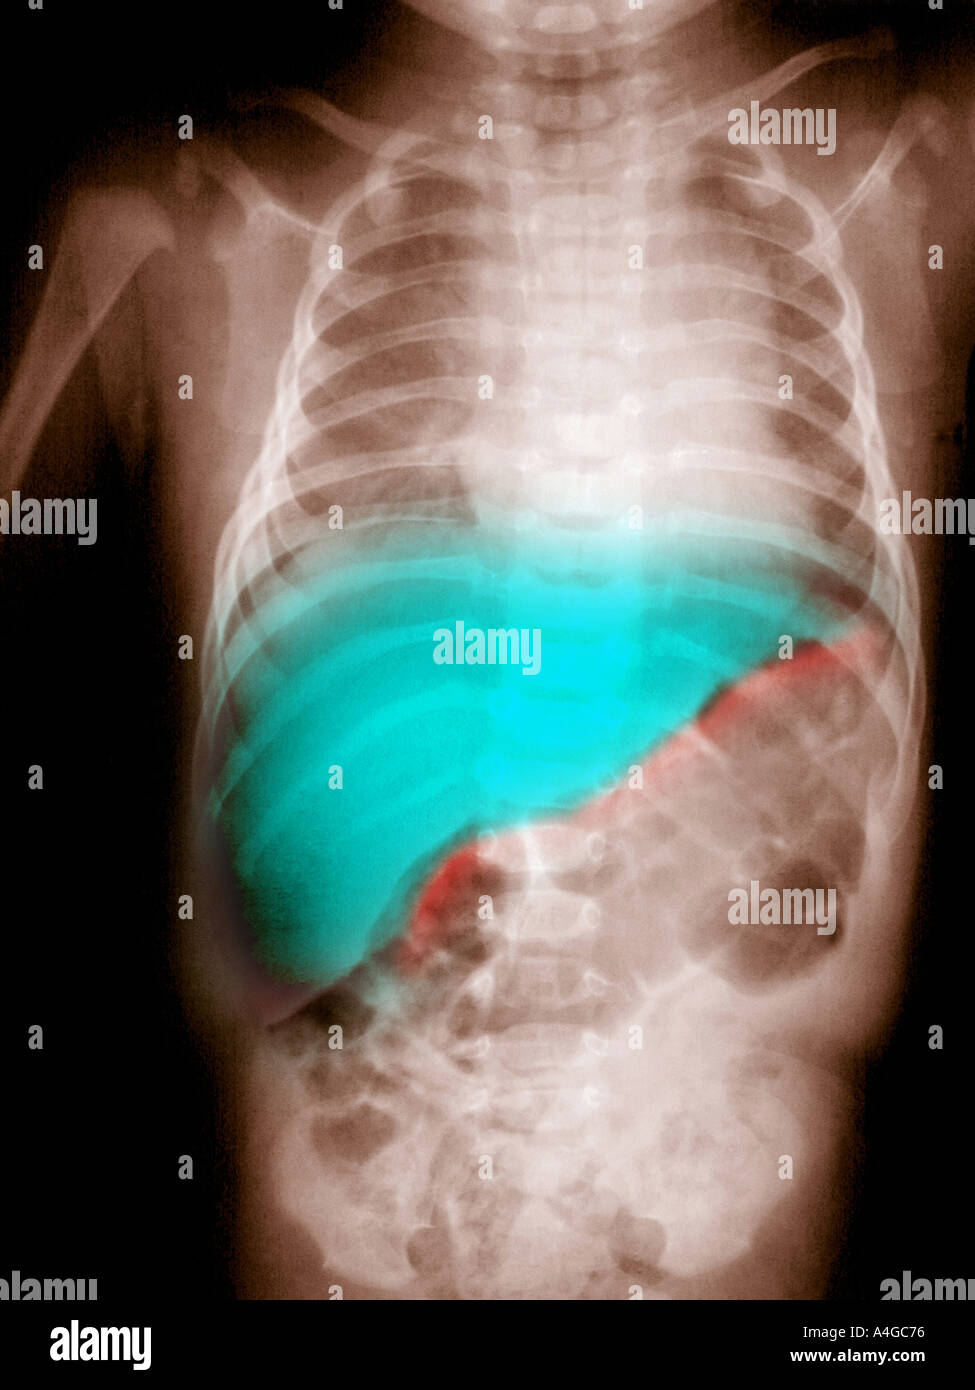 3 month old boy abdomen xray highlighting the normal liver shown in green Stock Photo